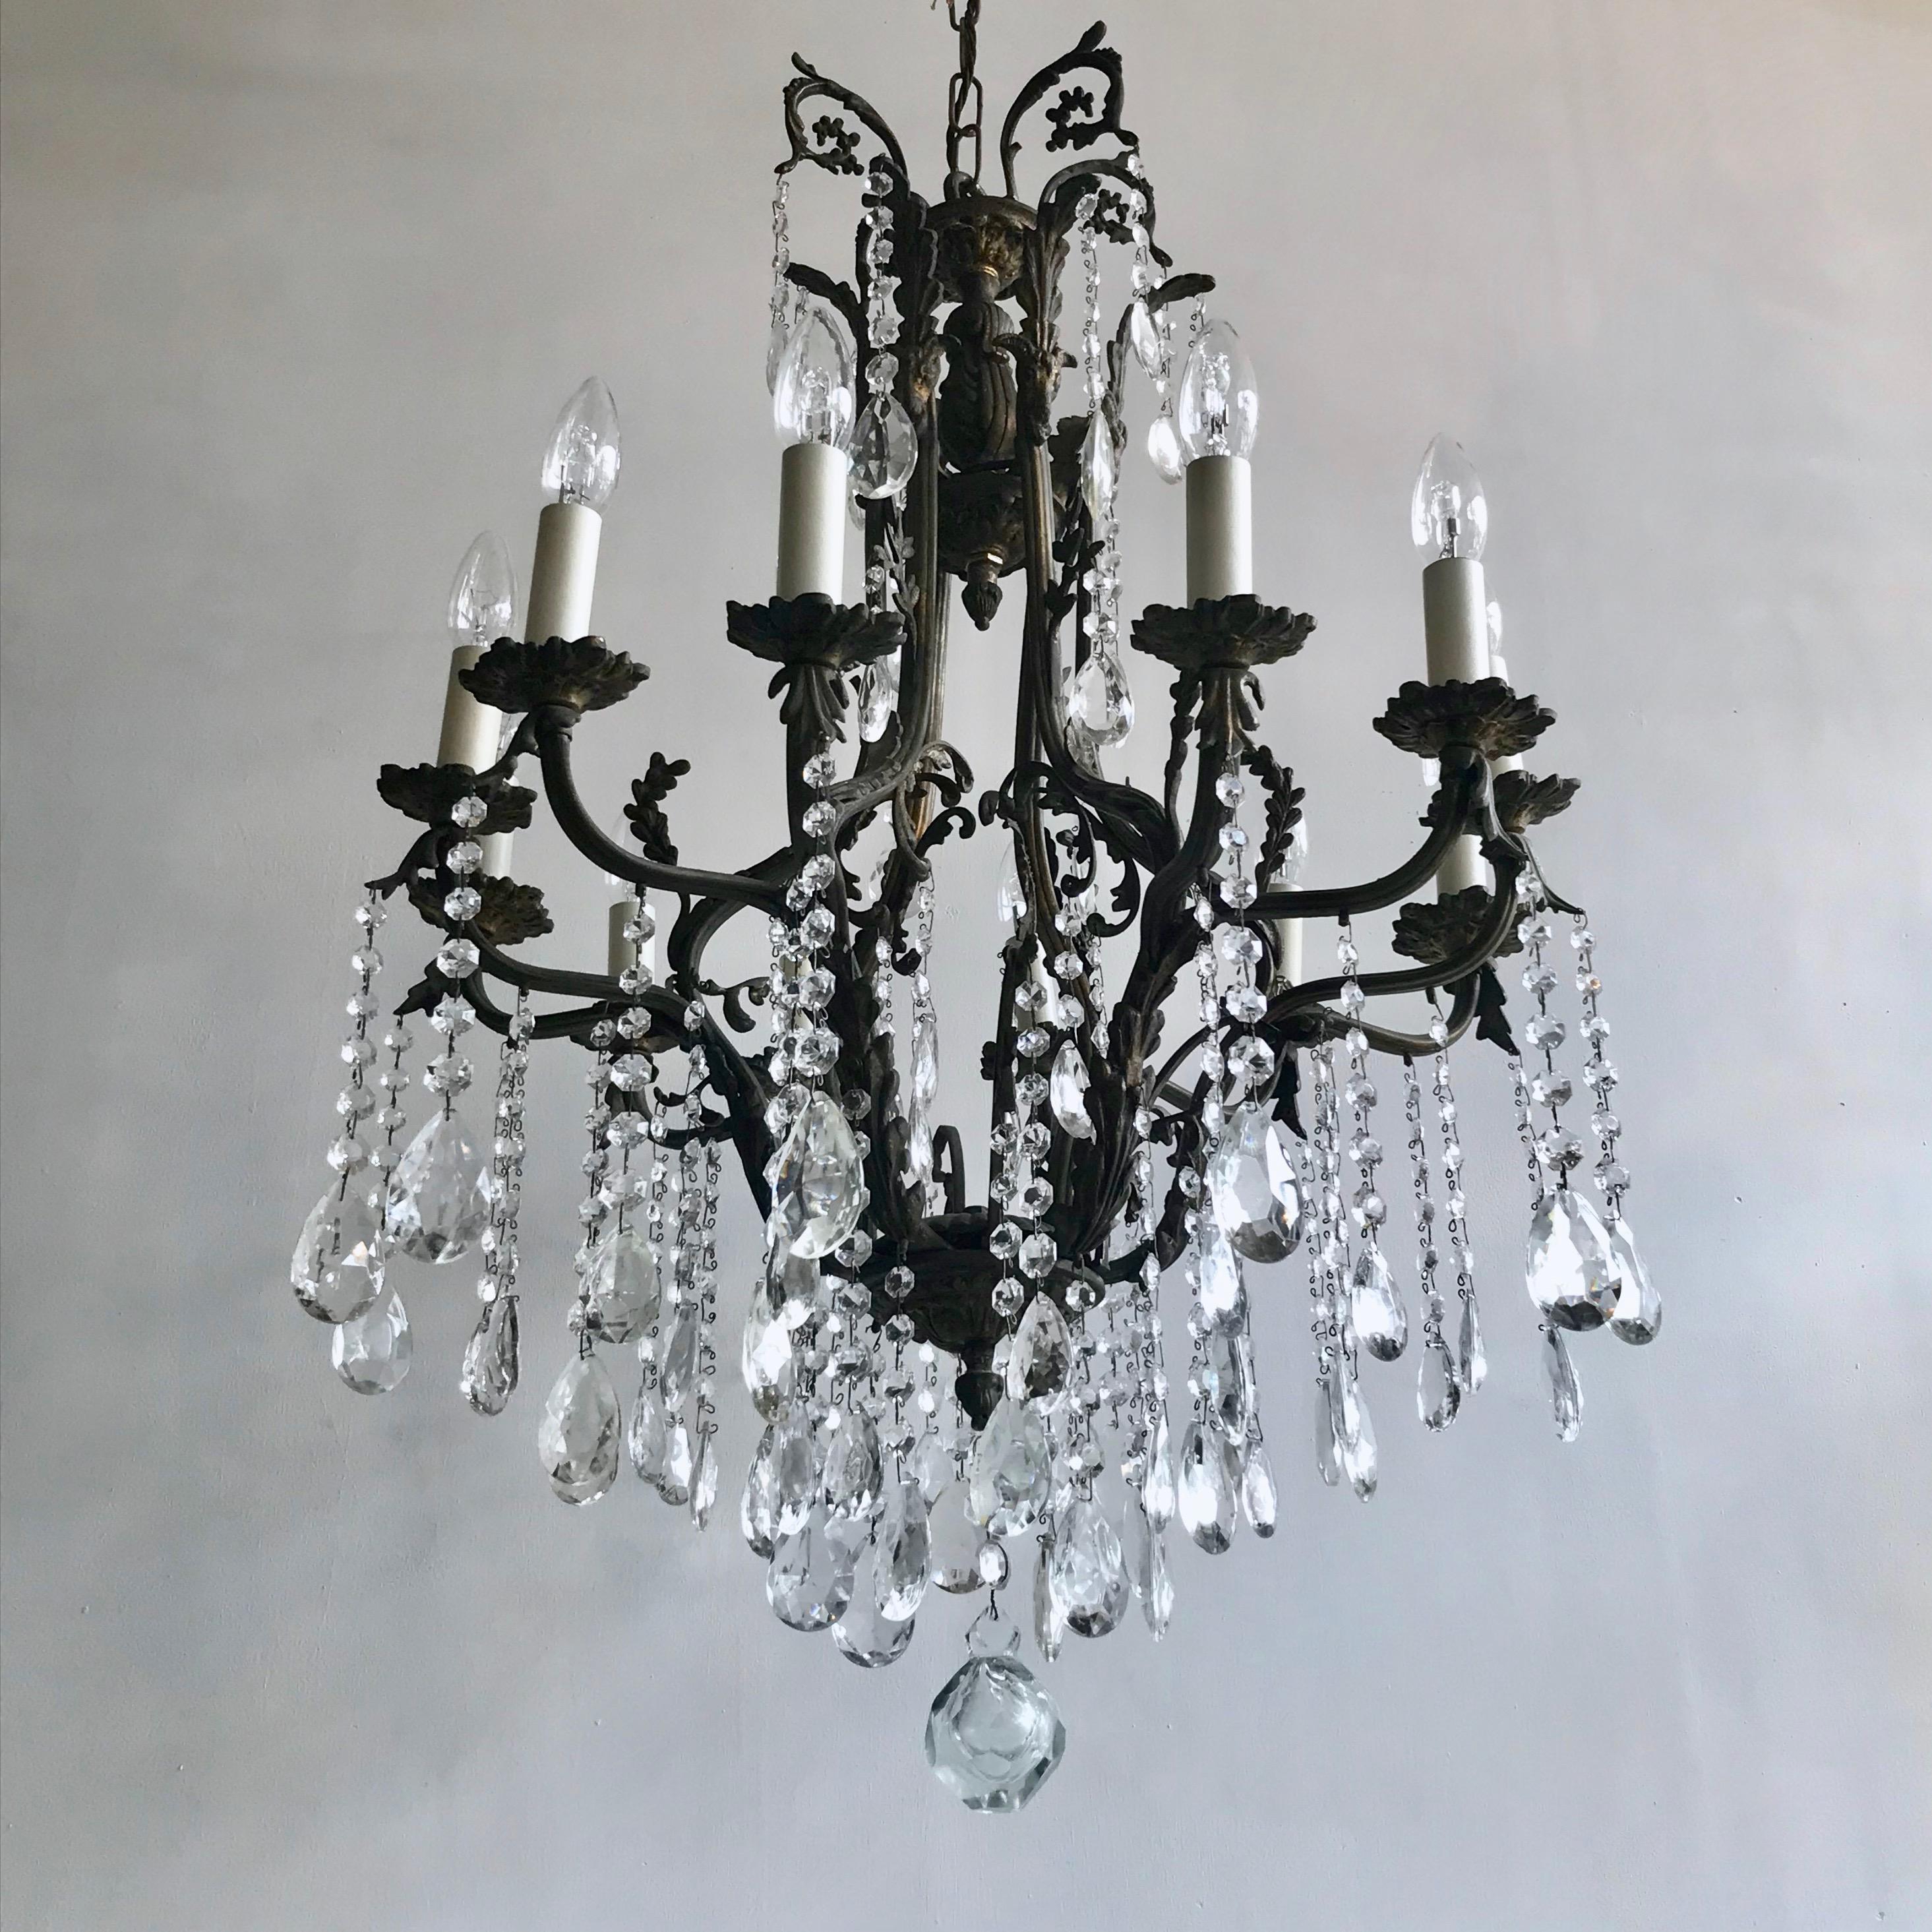 This large birdcage chandelier originates from early 1900s, Italy. Dressed in strings of glass buttons each finished with a hand cut crystal pear it is a stunning centre piece. The large chandelier frame is heavily oxidised and holds twelve lamps in